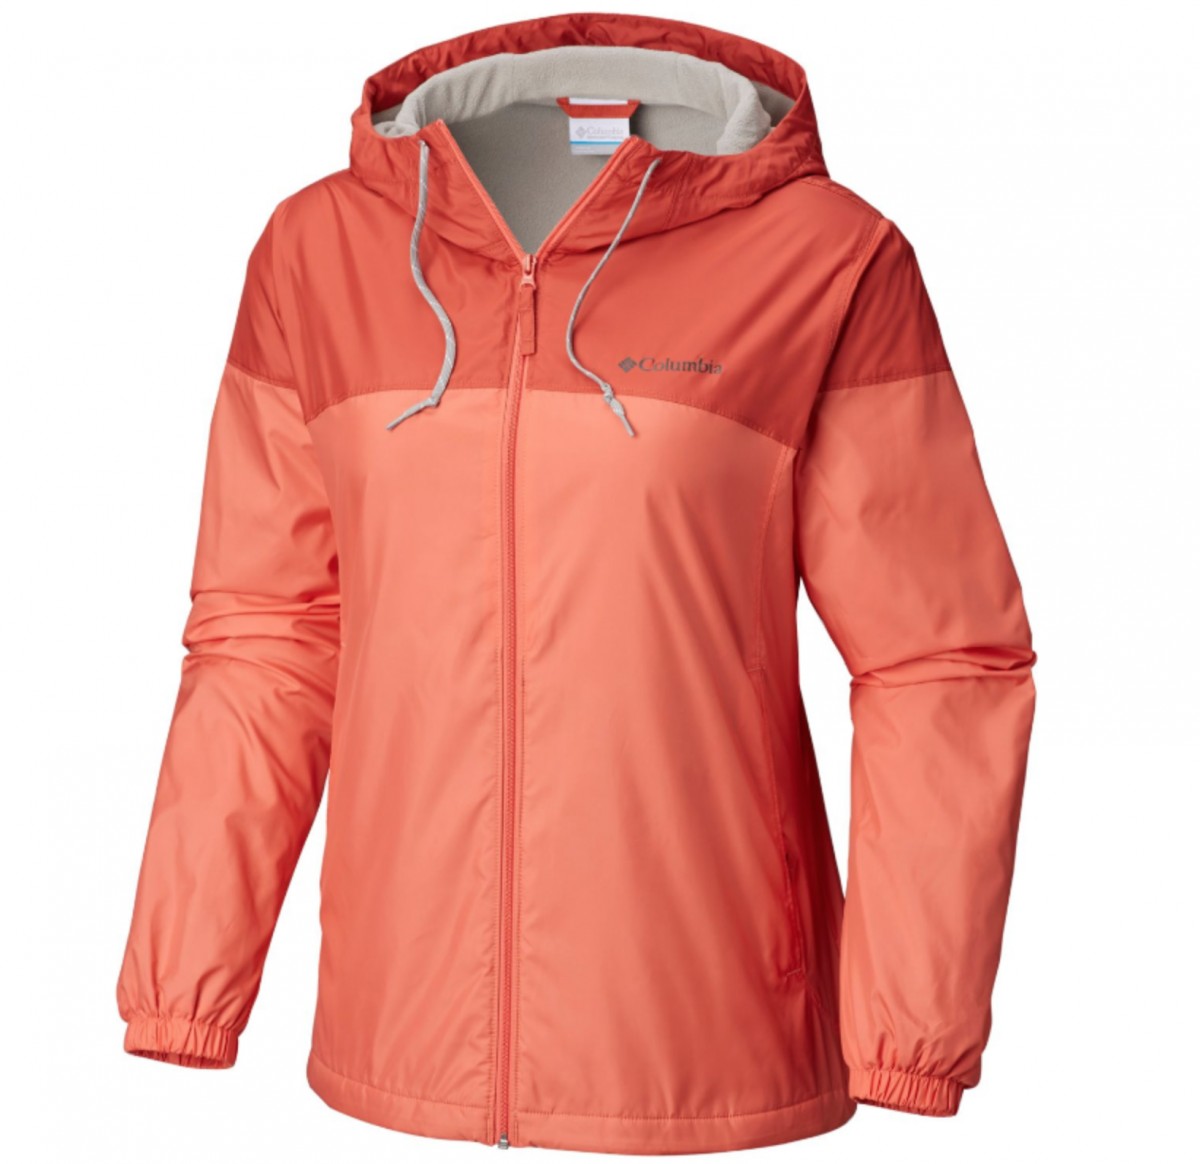 Columbia Flash Forward Lined - Women's Review